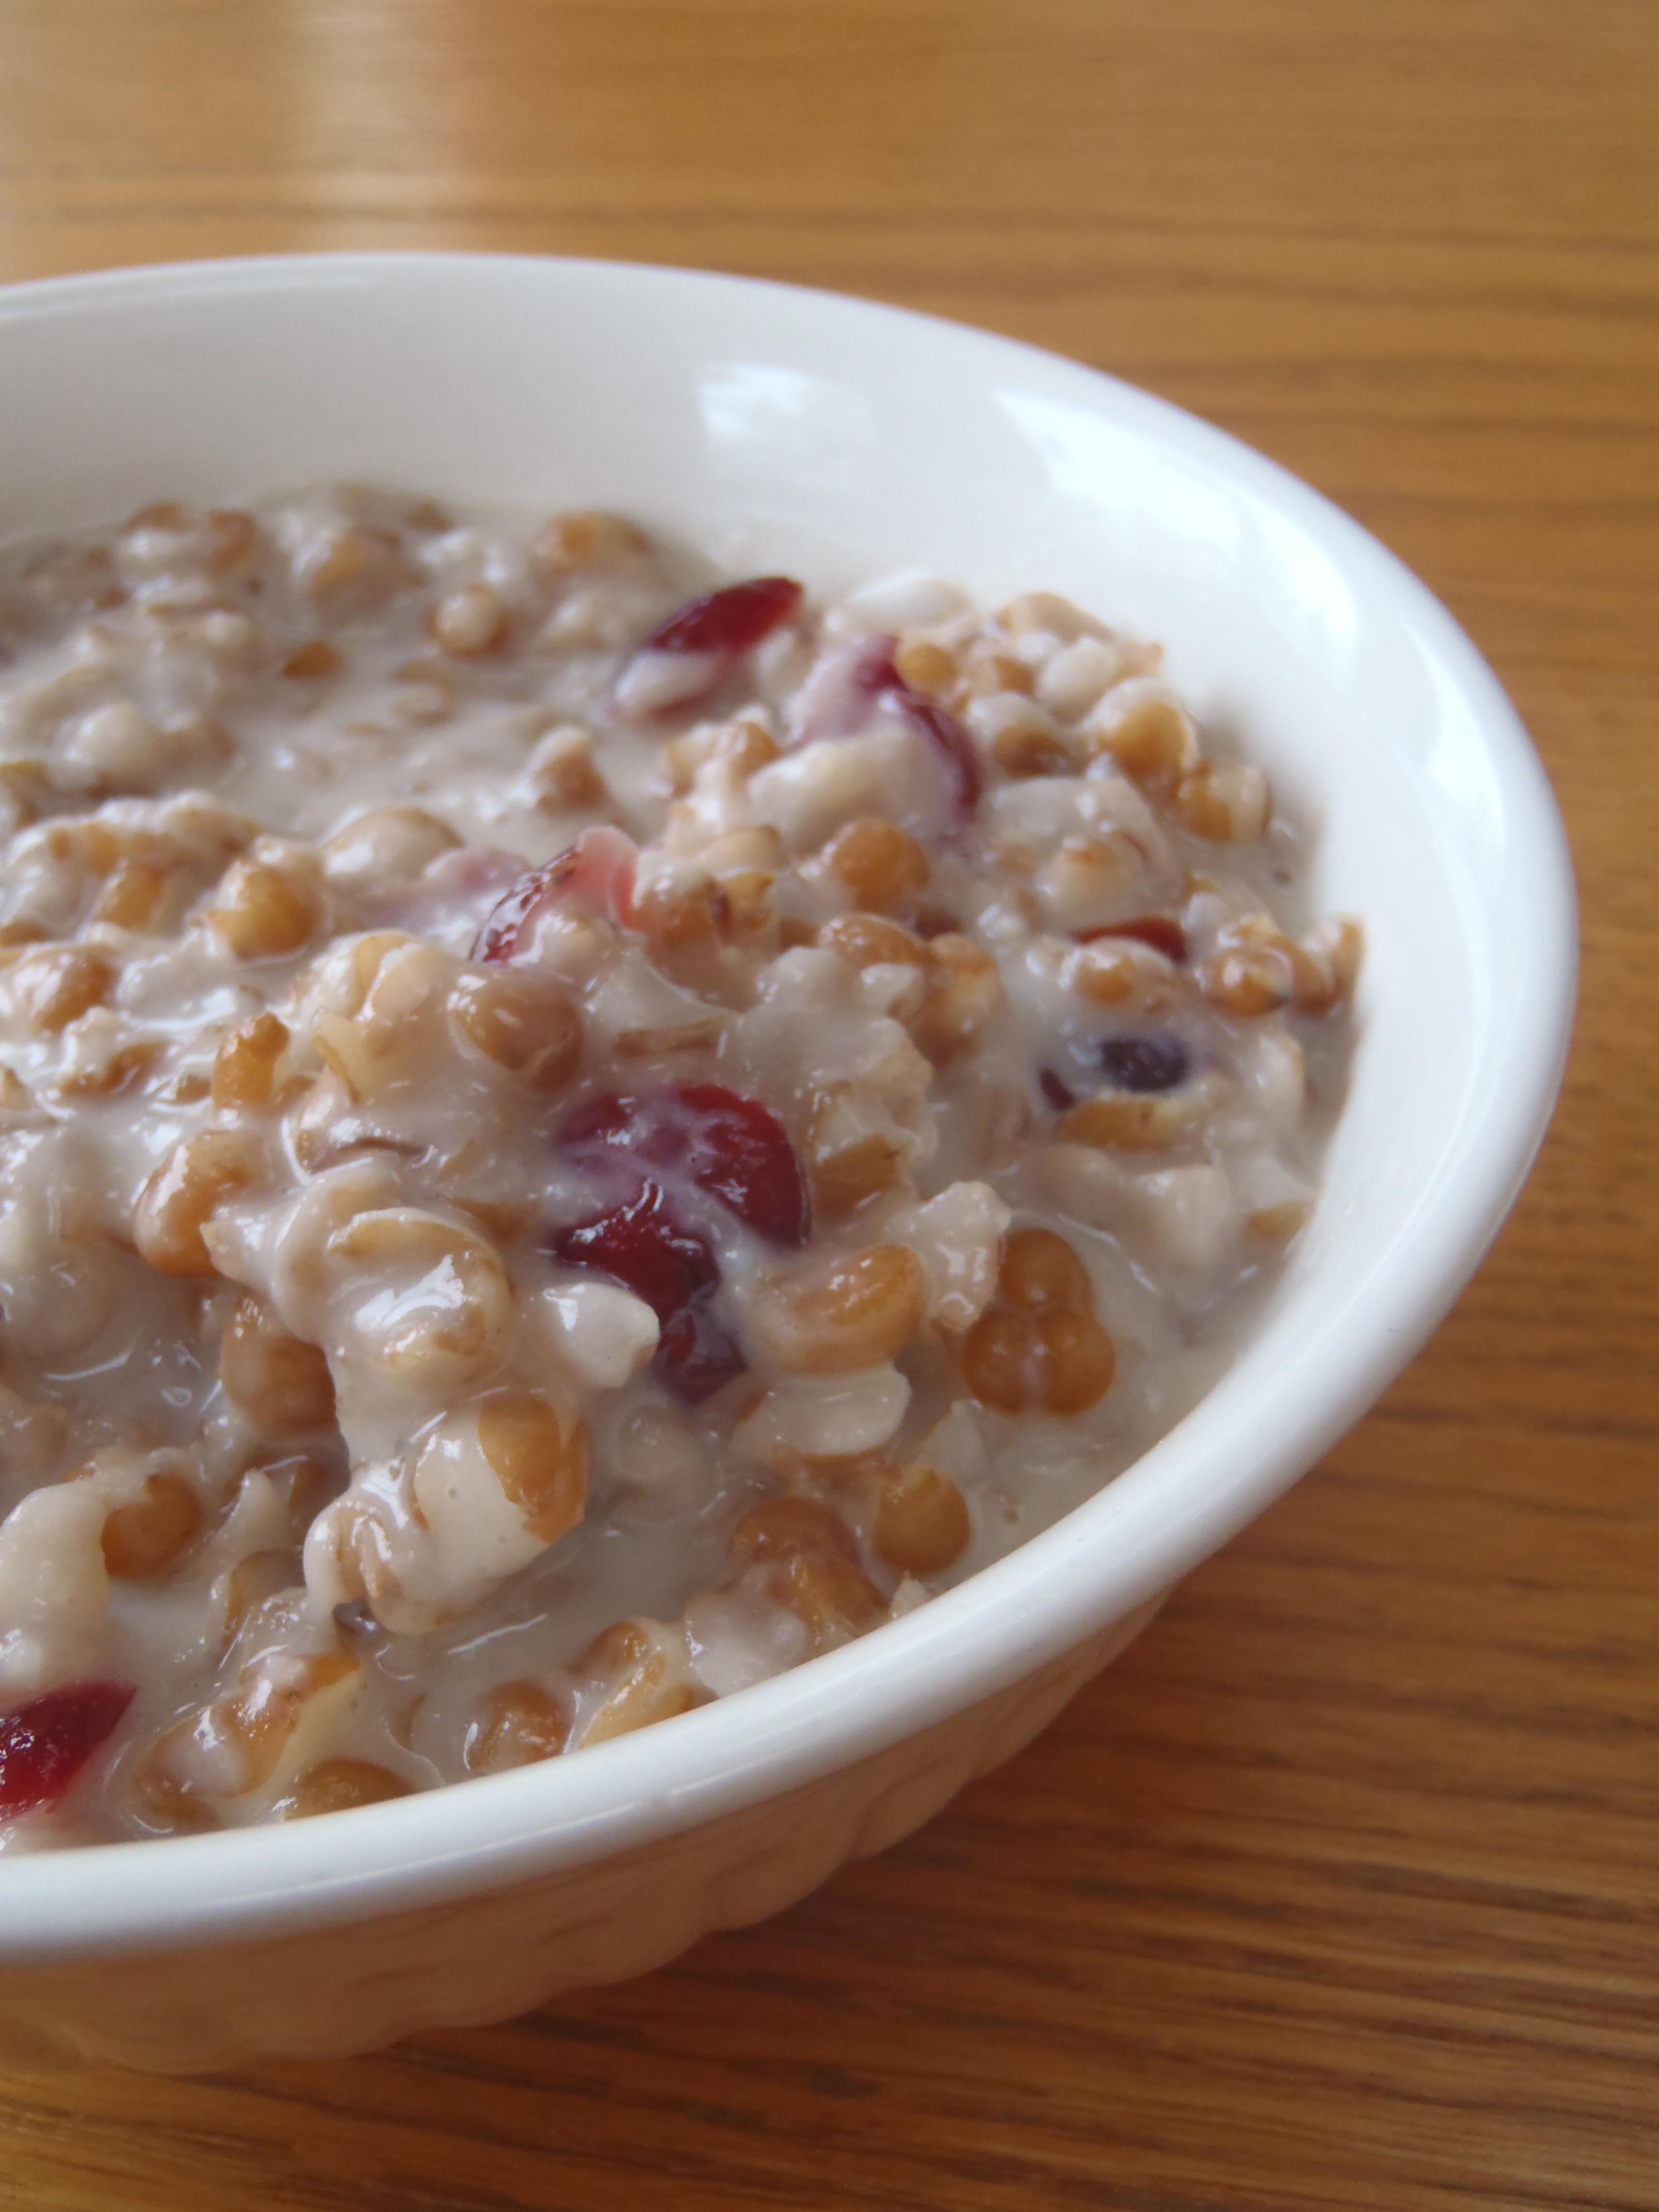 A bowl of wheat pudding, or kutia, with dried cranberries